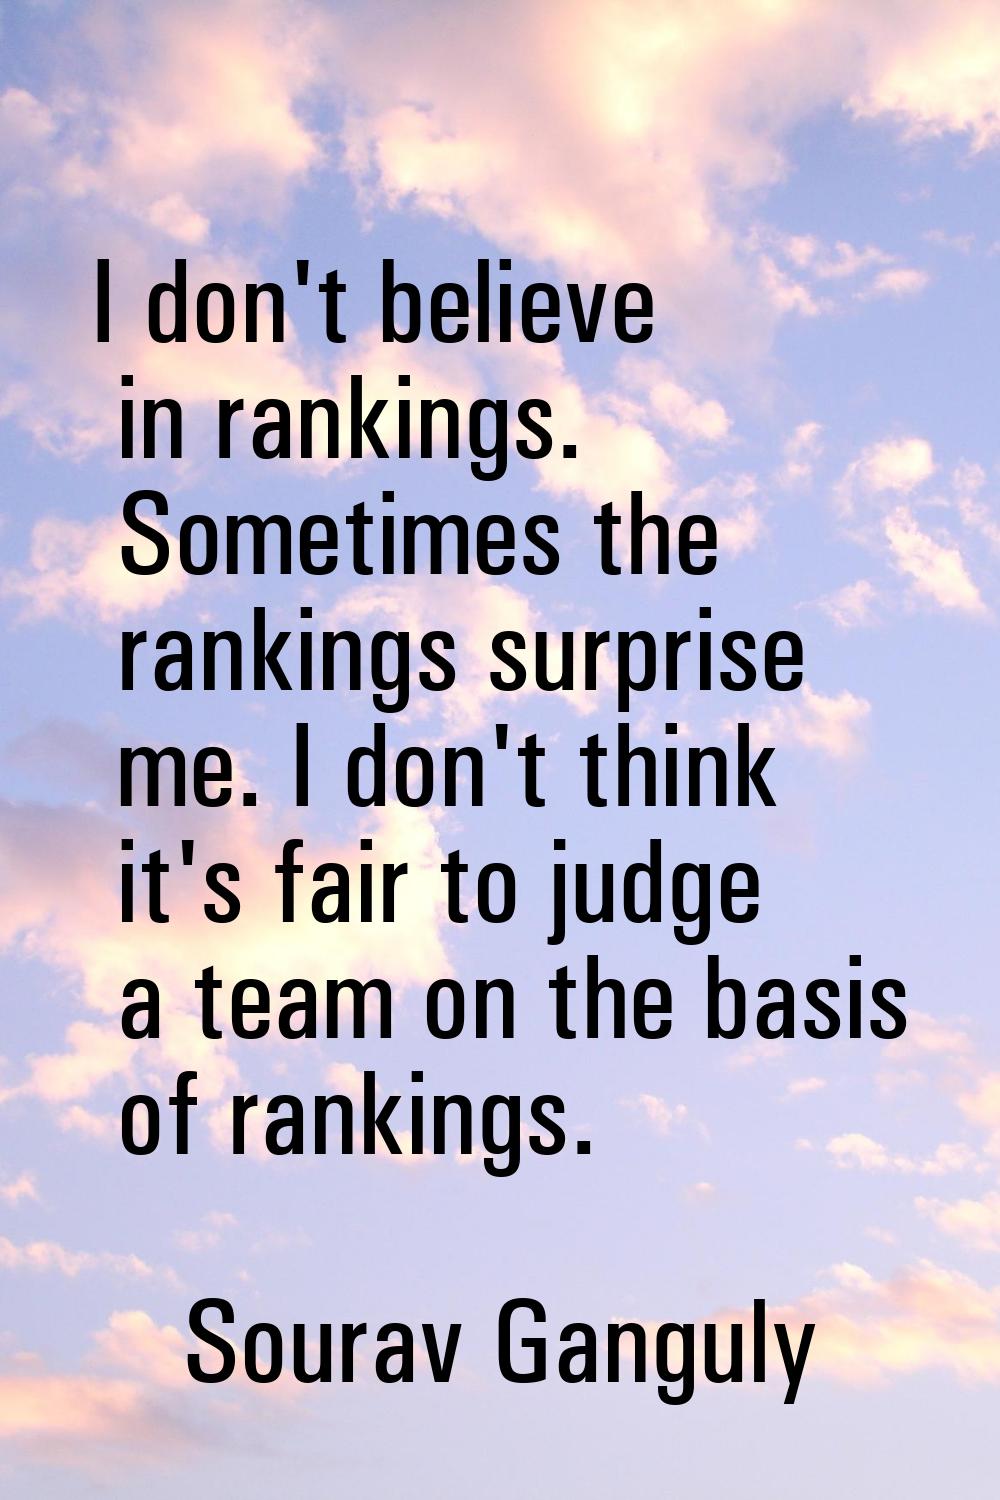 I don't believe in rankings. Sometimes the rankings surprise me. I don't think it's fair to judge a